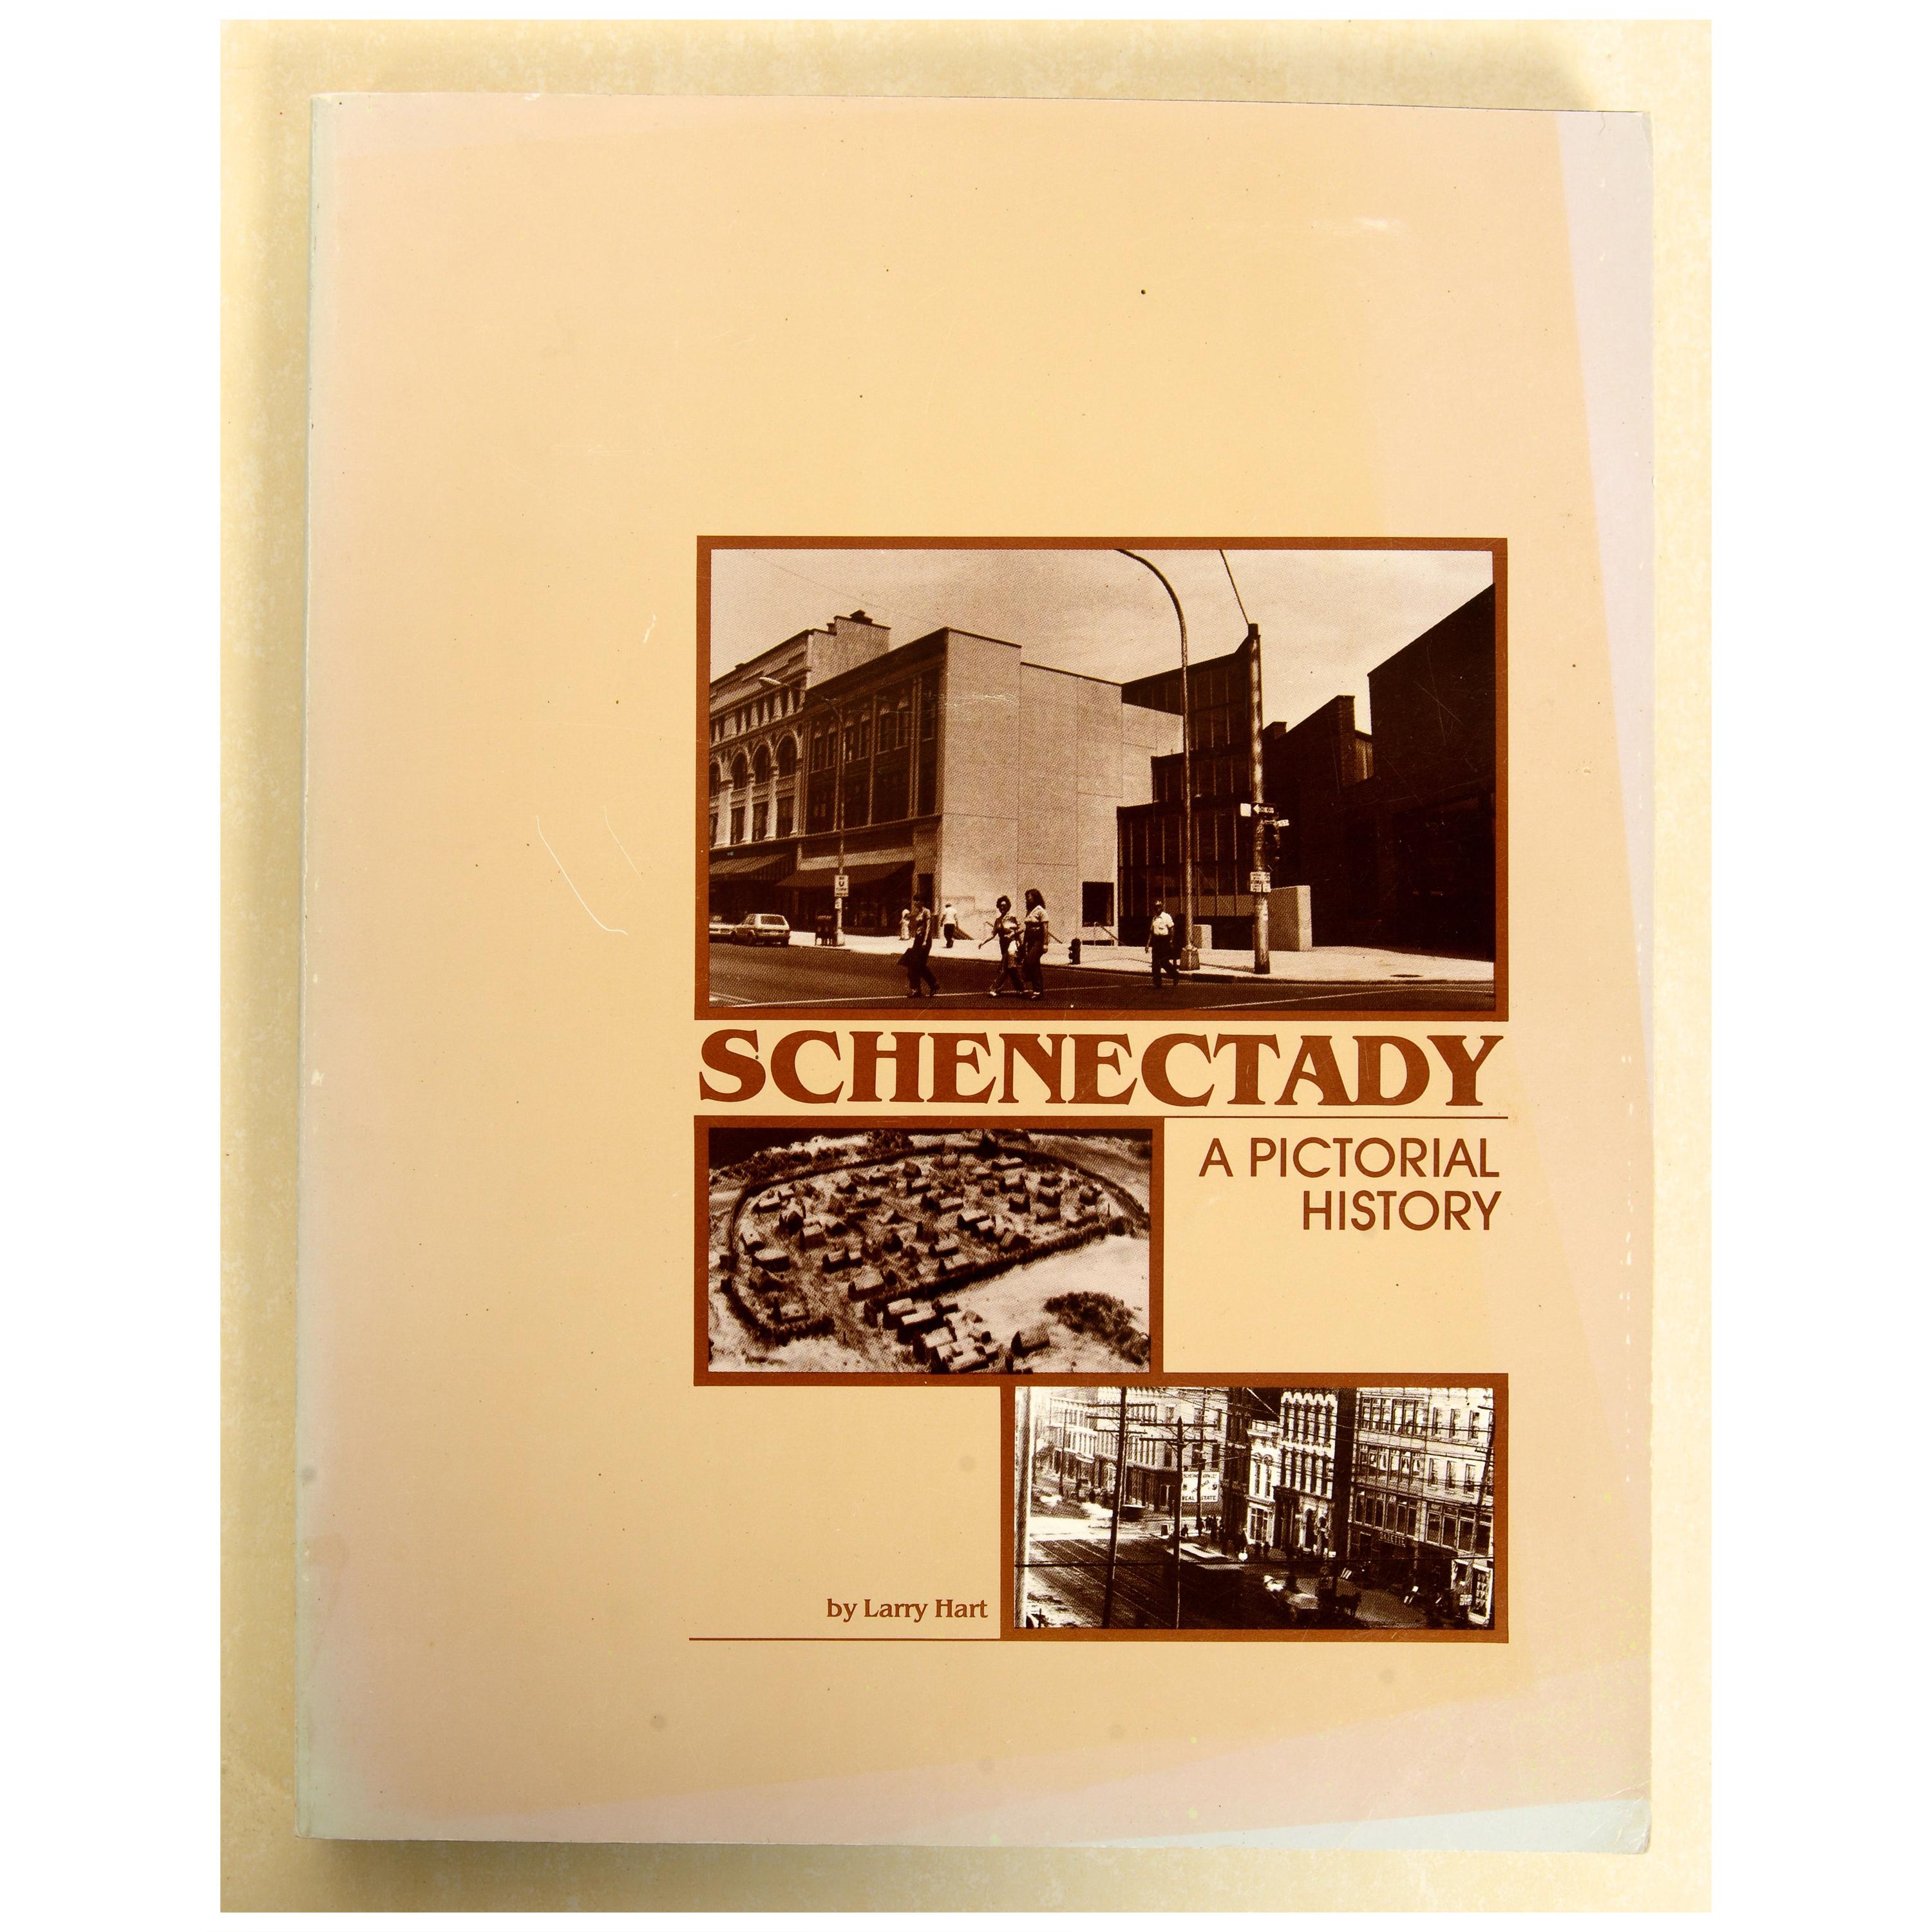 Schenectady A Pictorial History, Written and Signed by Larry Hart